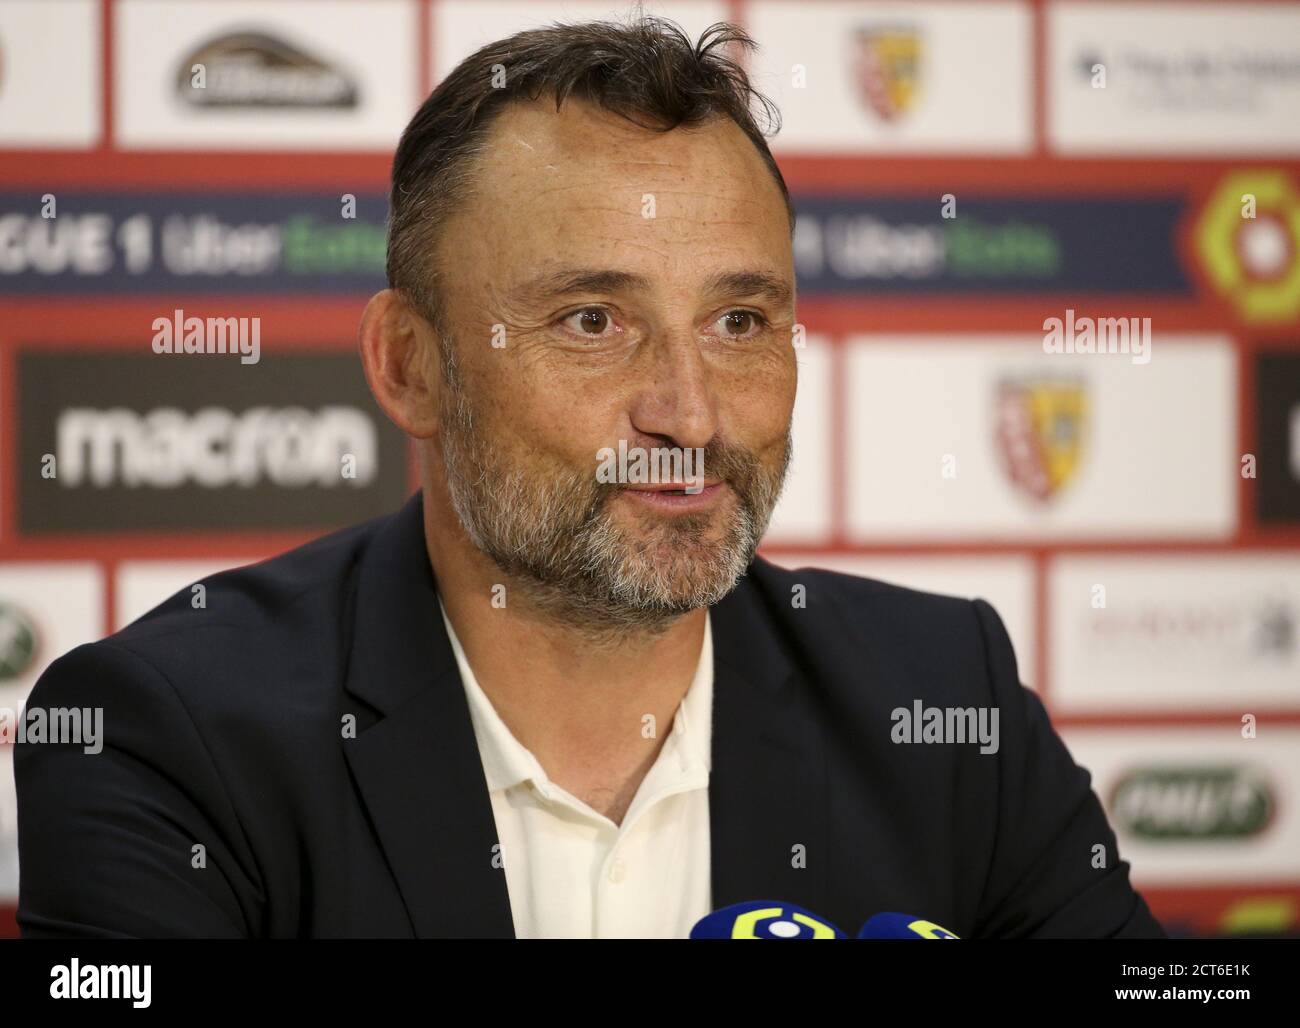 Coach of RC Lens Franck Haise during the press conference following the French championship Ligue 1 football match between RC Lens and Girondins de Bo Stock Photo